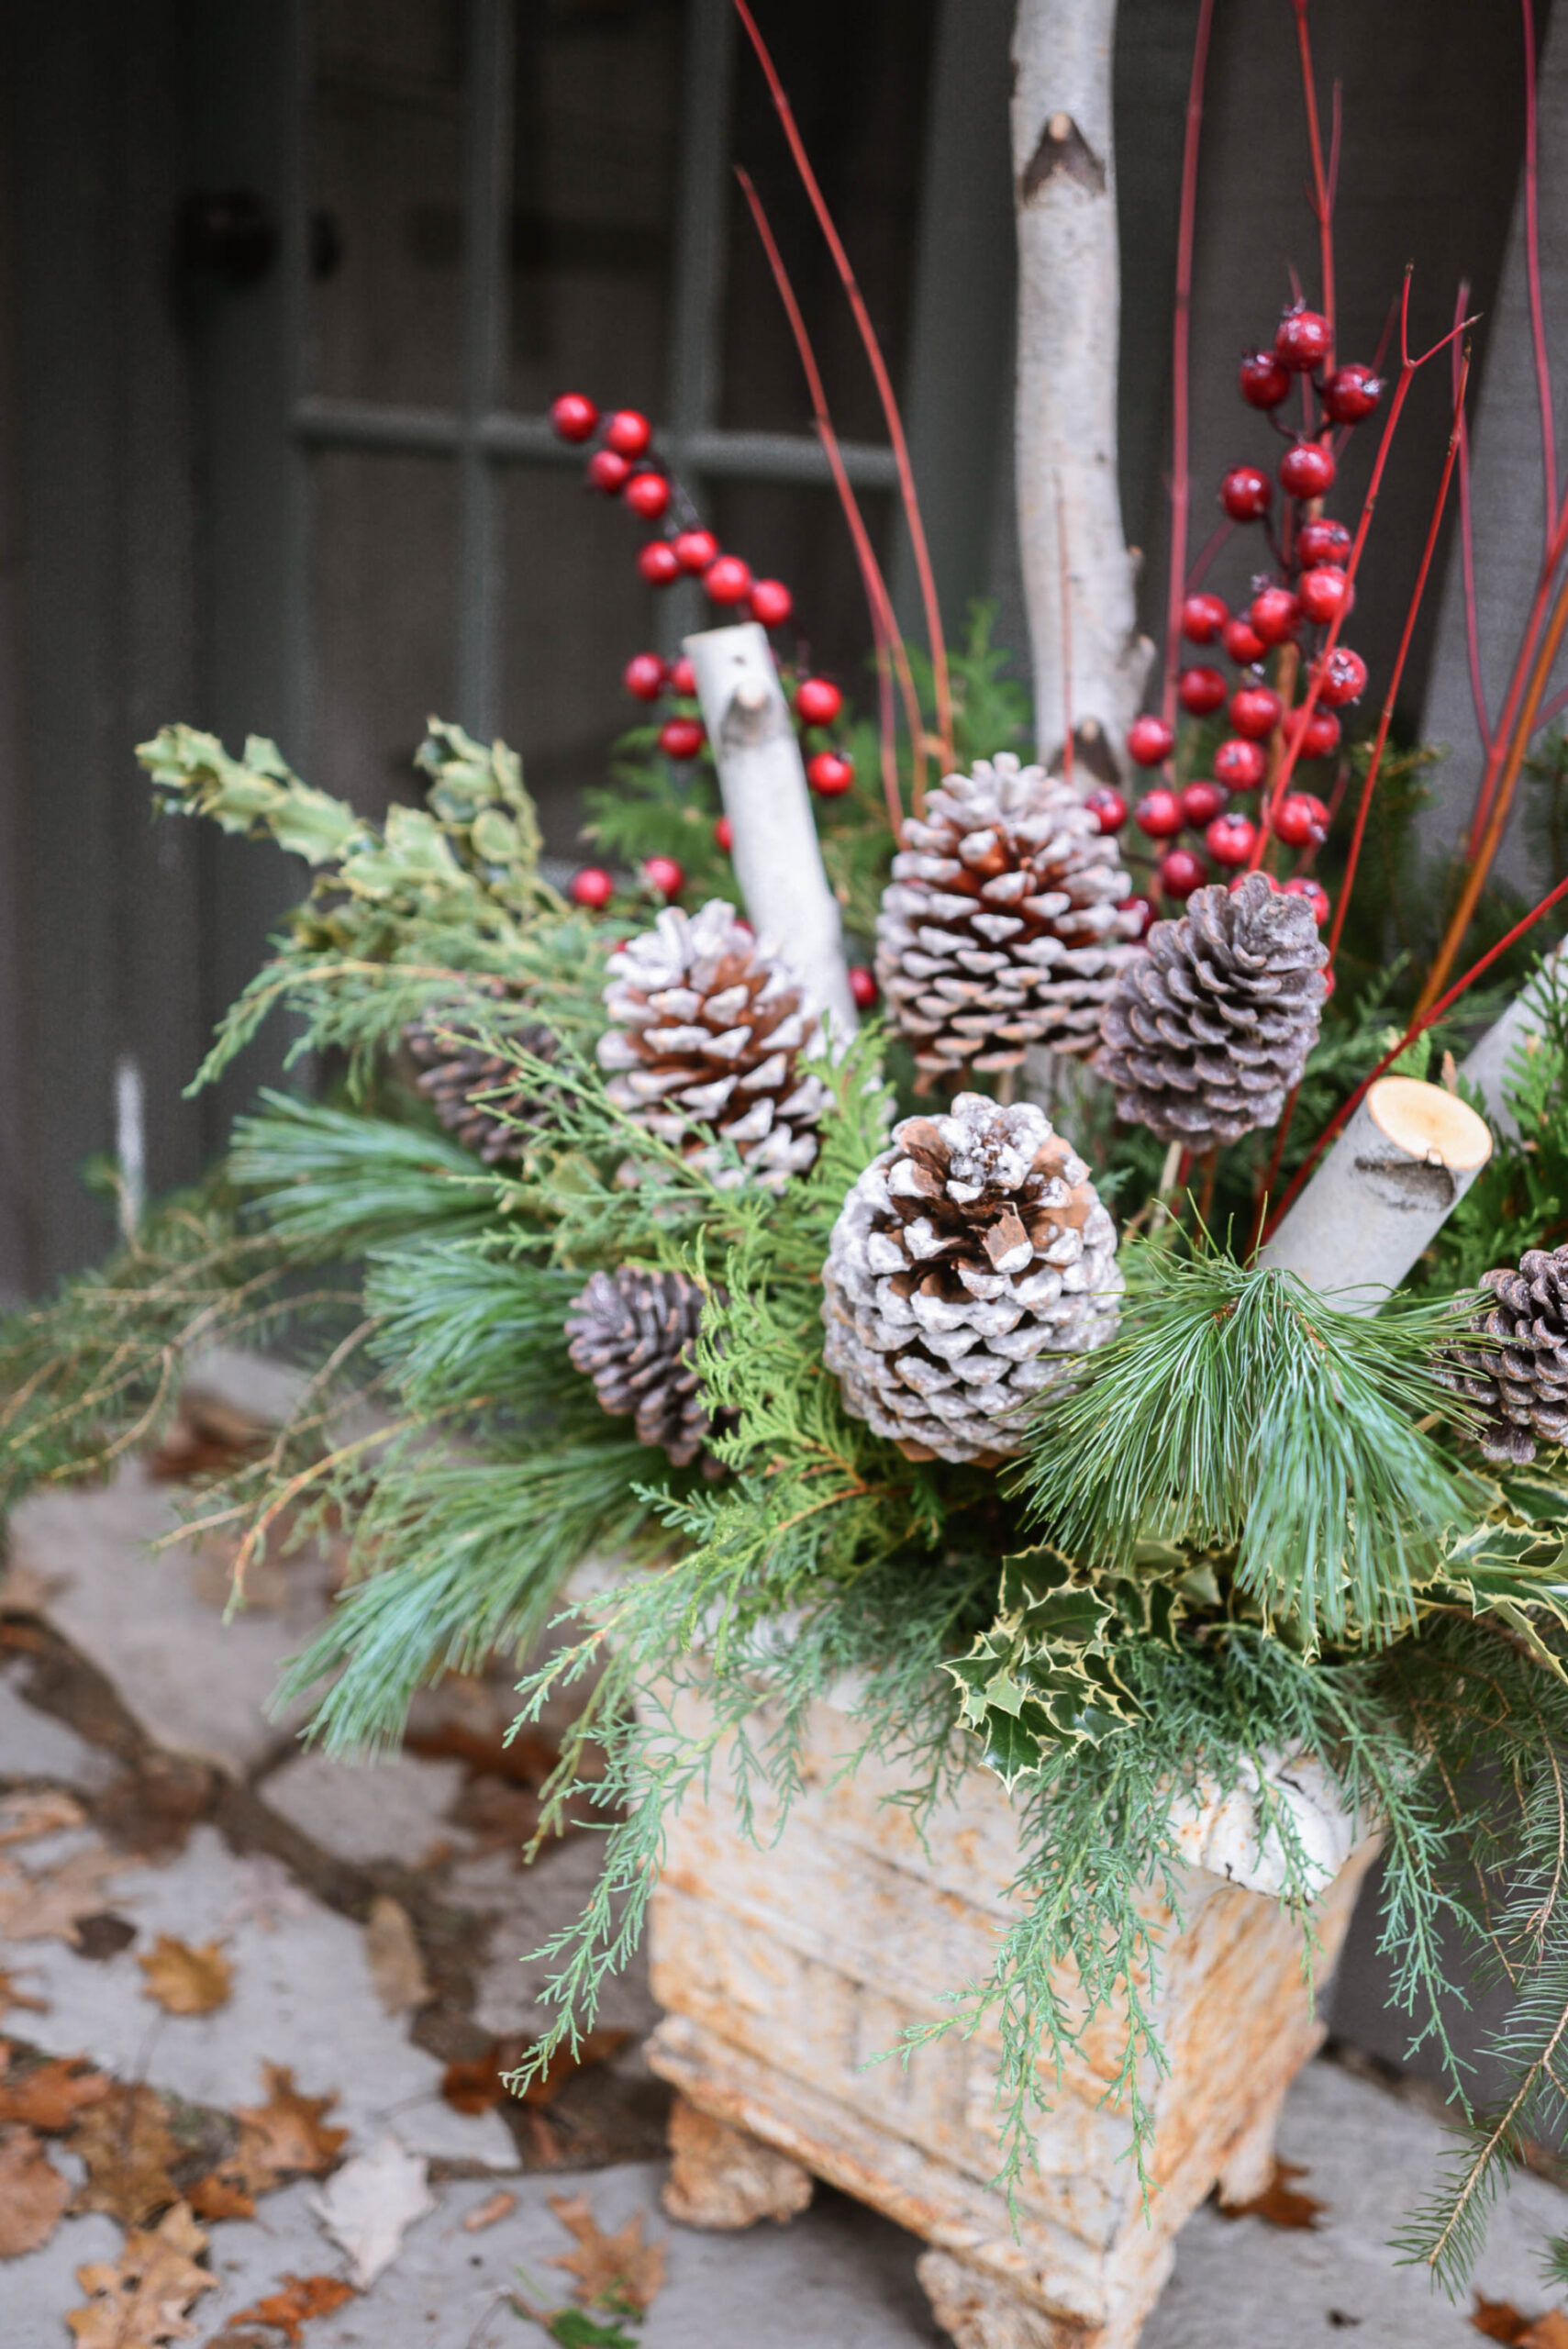 How to Make Outdoor Christmas Planters using Evergreen Boughs